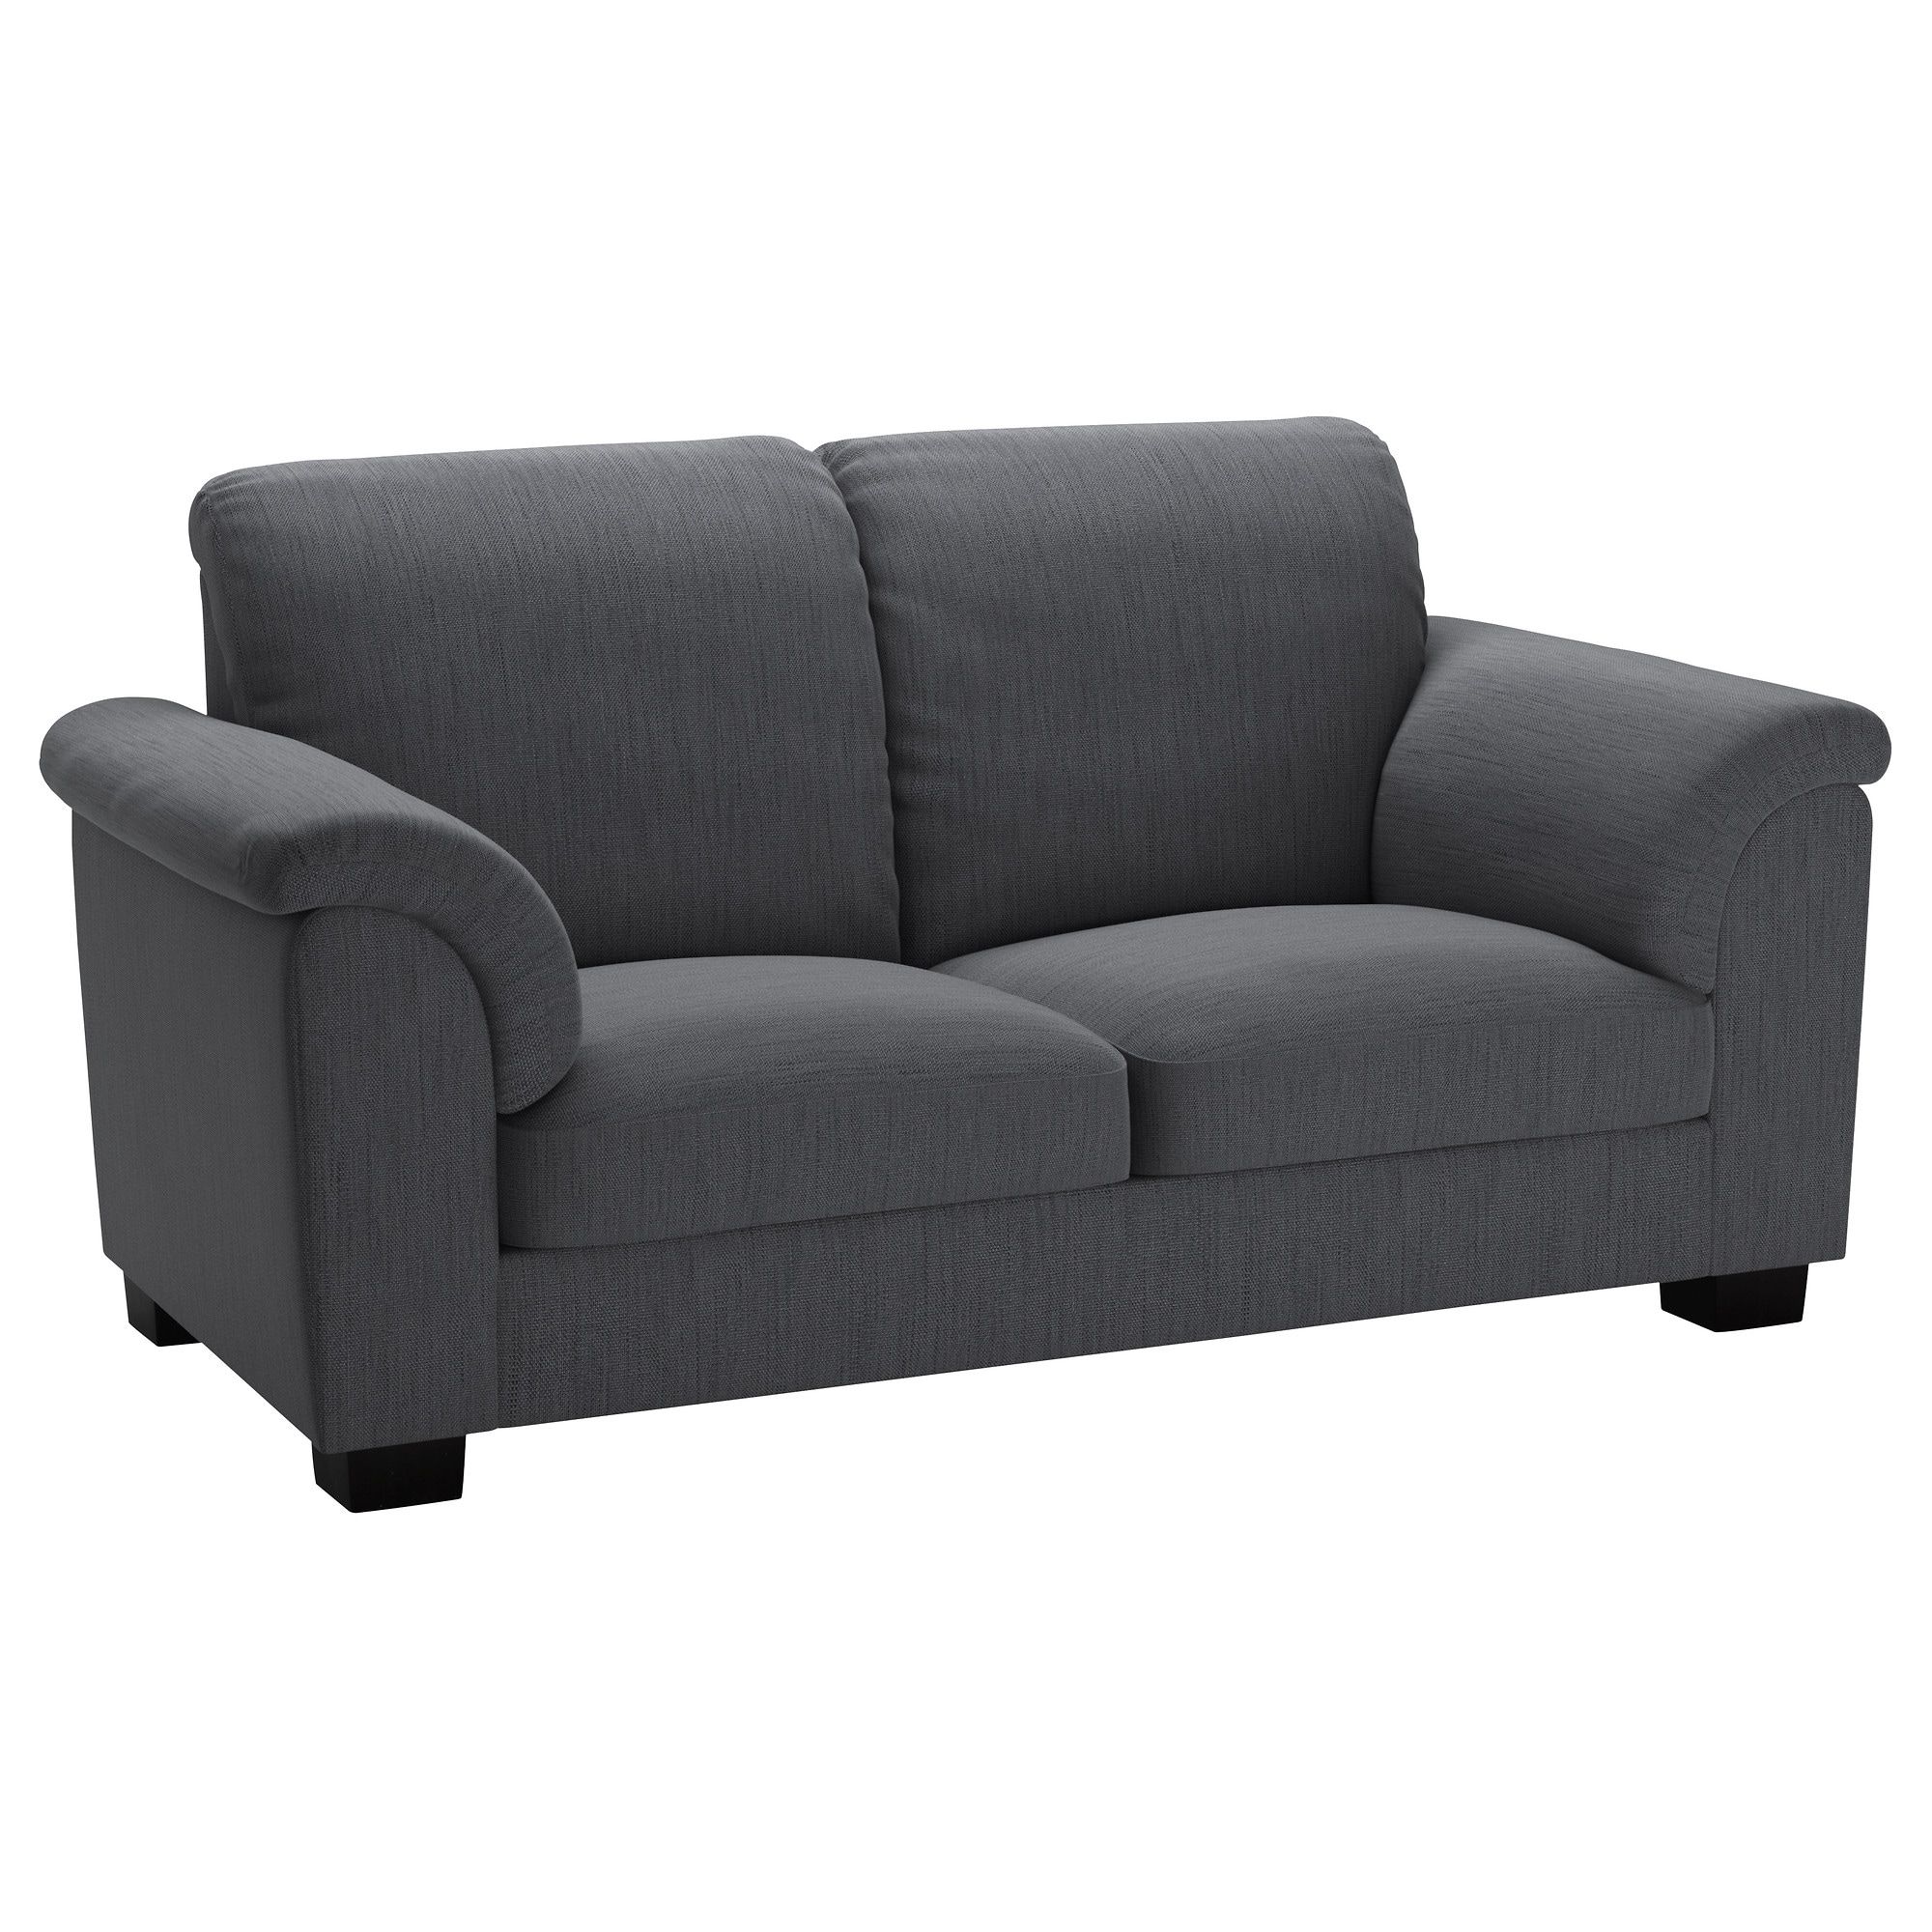 Cheap Sofa Chairs Regarding Best And Newest Sofas – Settees, Couches & More (View 5 of 20)